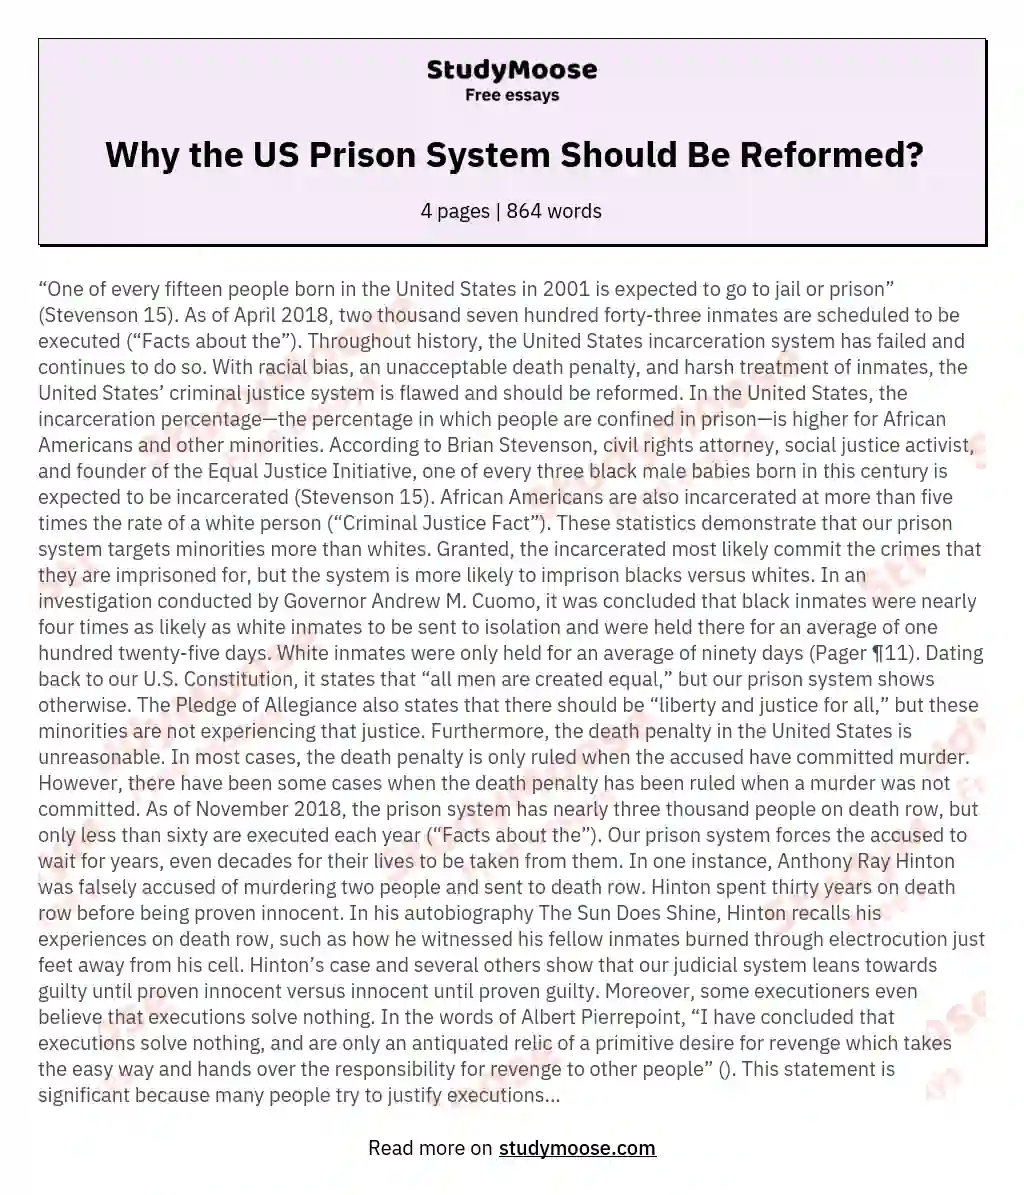 Why the US Prison System Should Be Reformed? essay